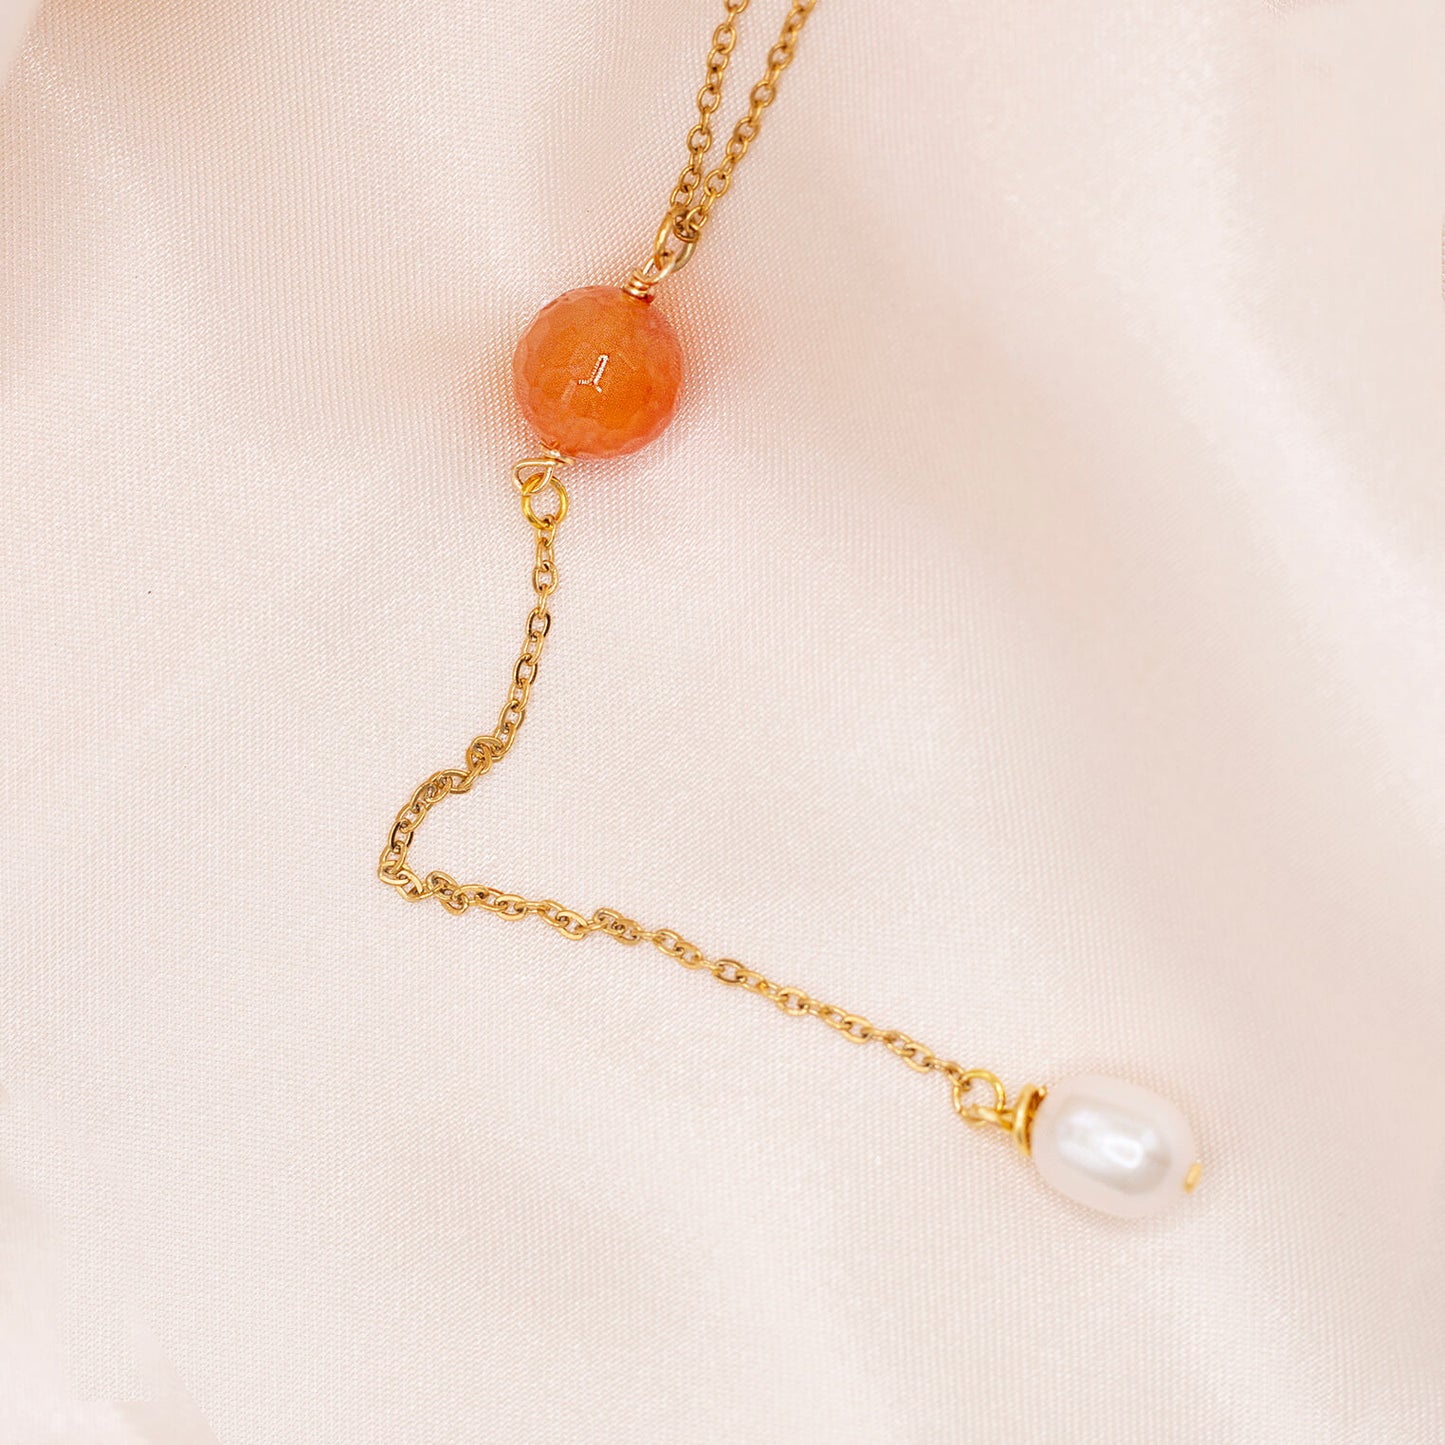 Orange red gemstone bead lariat necklace with dangling pearl. Hypoallergenic, gold-plated stainless steel. Water resistant.